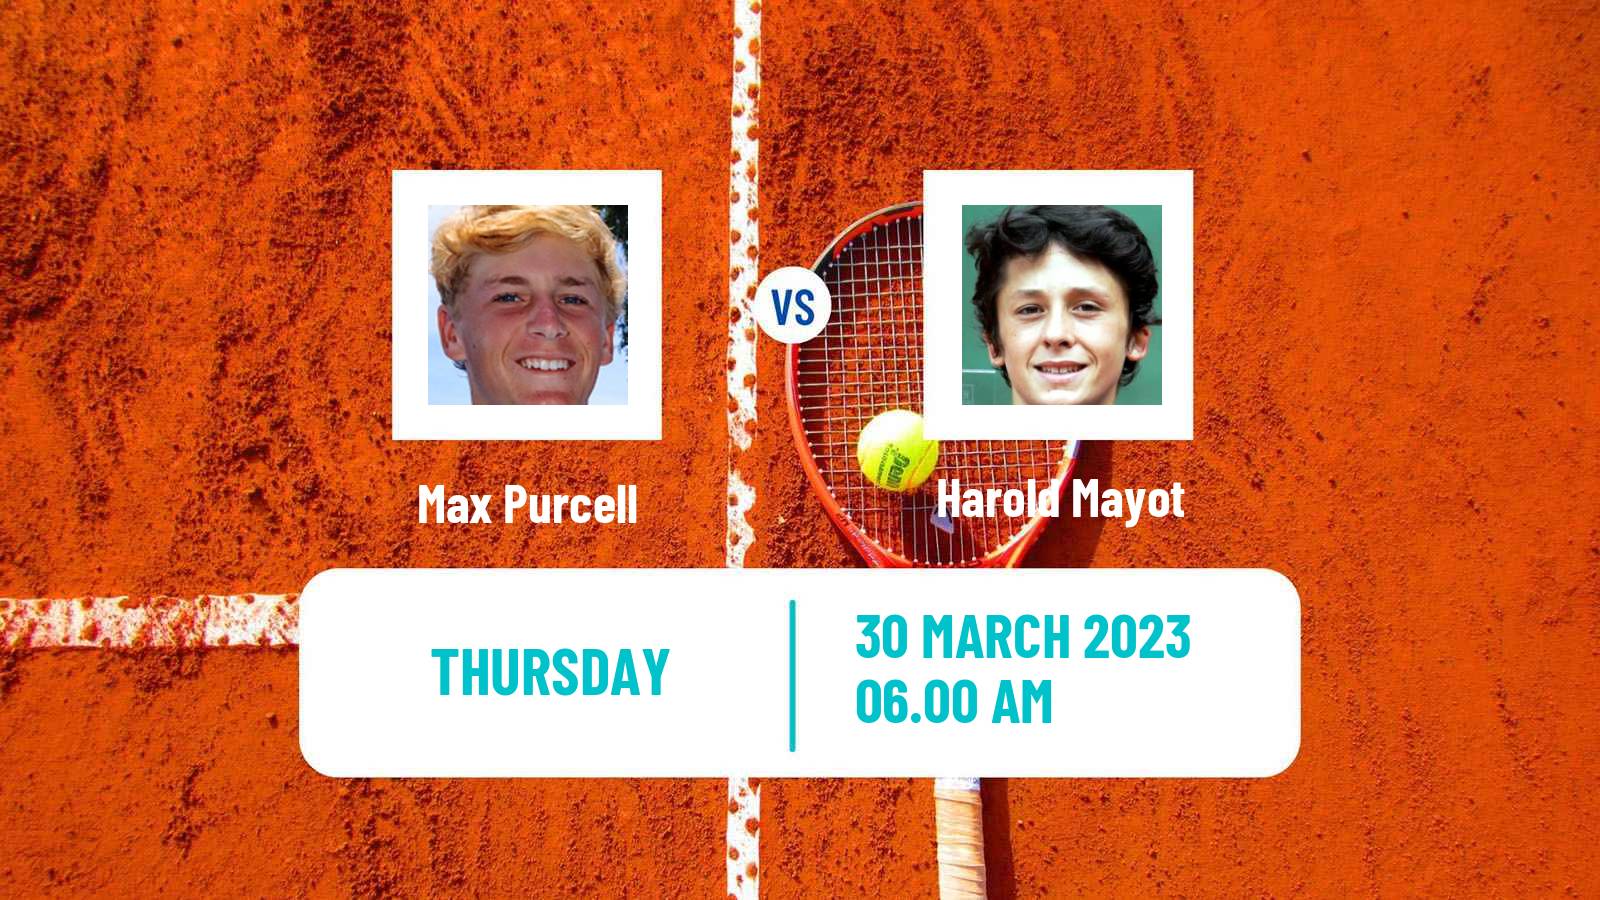 Tennis ATP Challenger Max Purcell - Harold Mayot